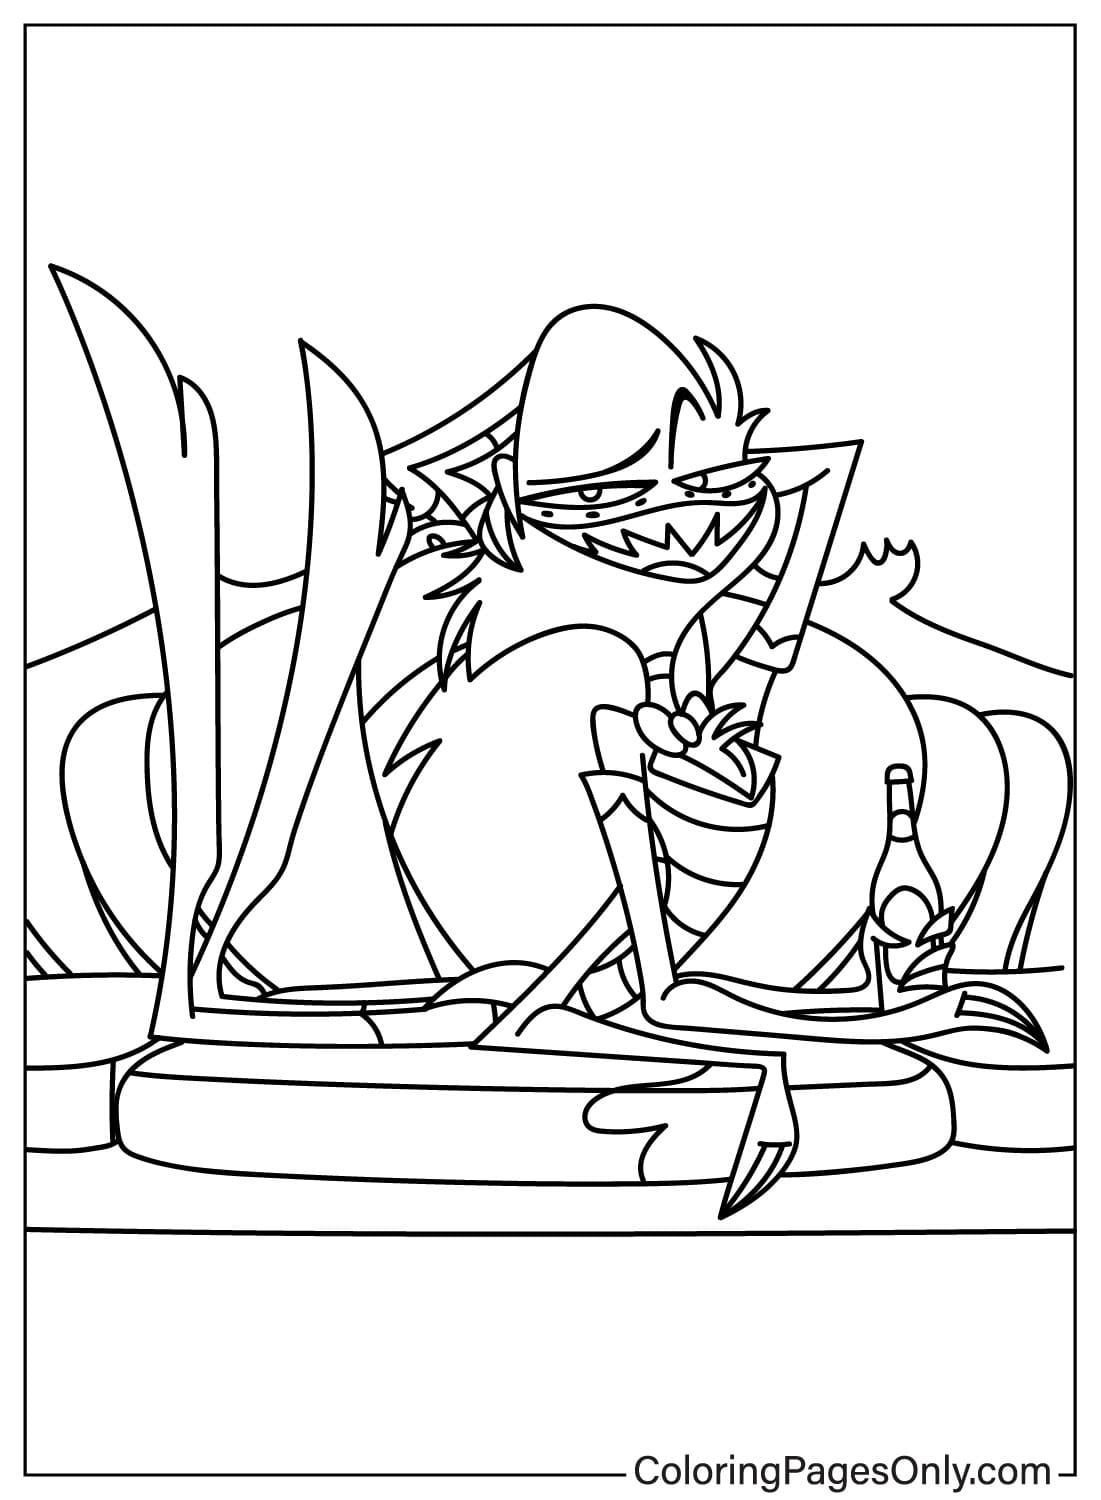 Angel Dust Coloring Page for Kids from Hazbin Hotel